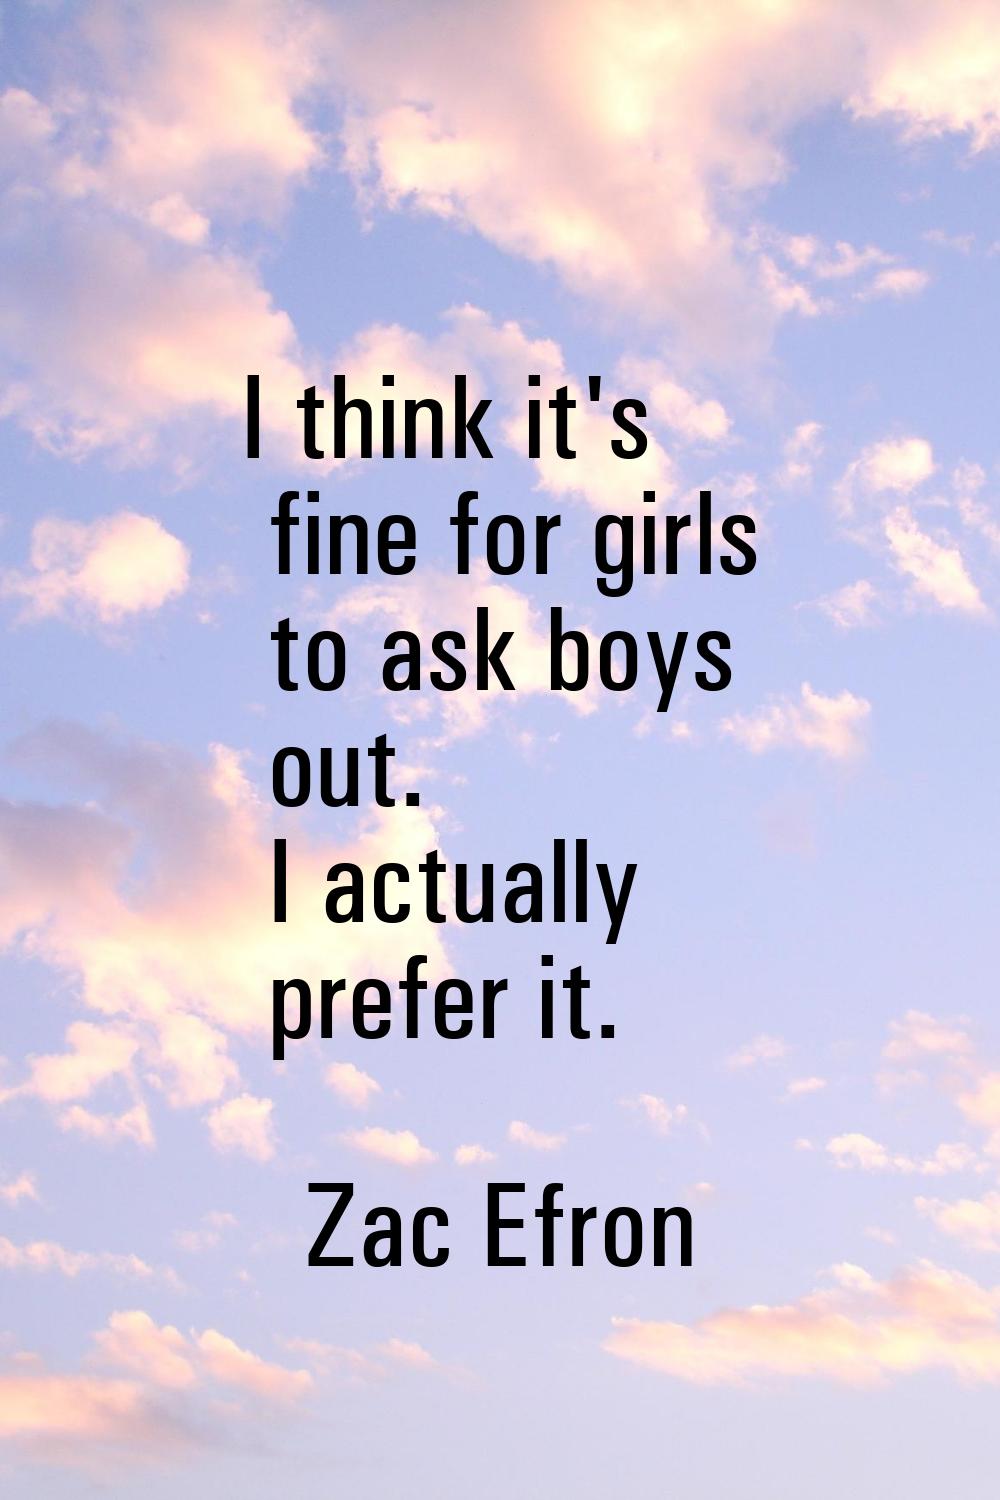 I think it's fine for girls to ask boys out. I actually prefer it.